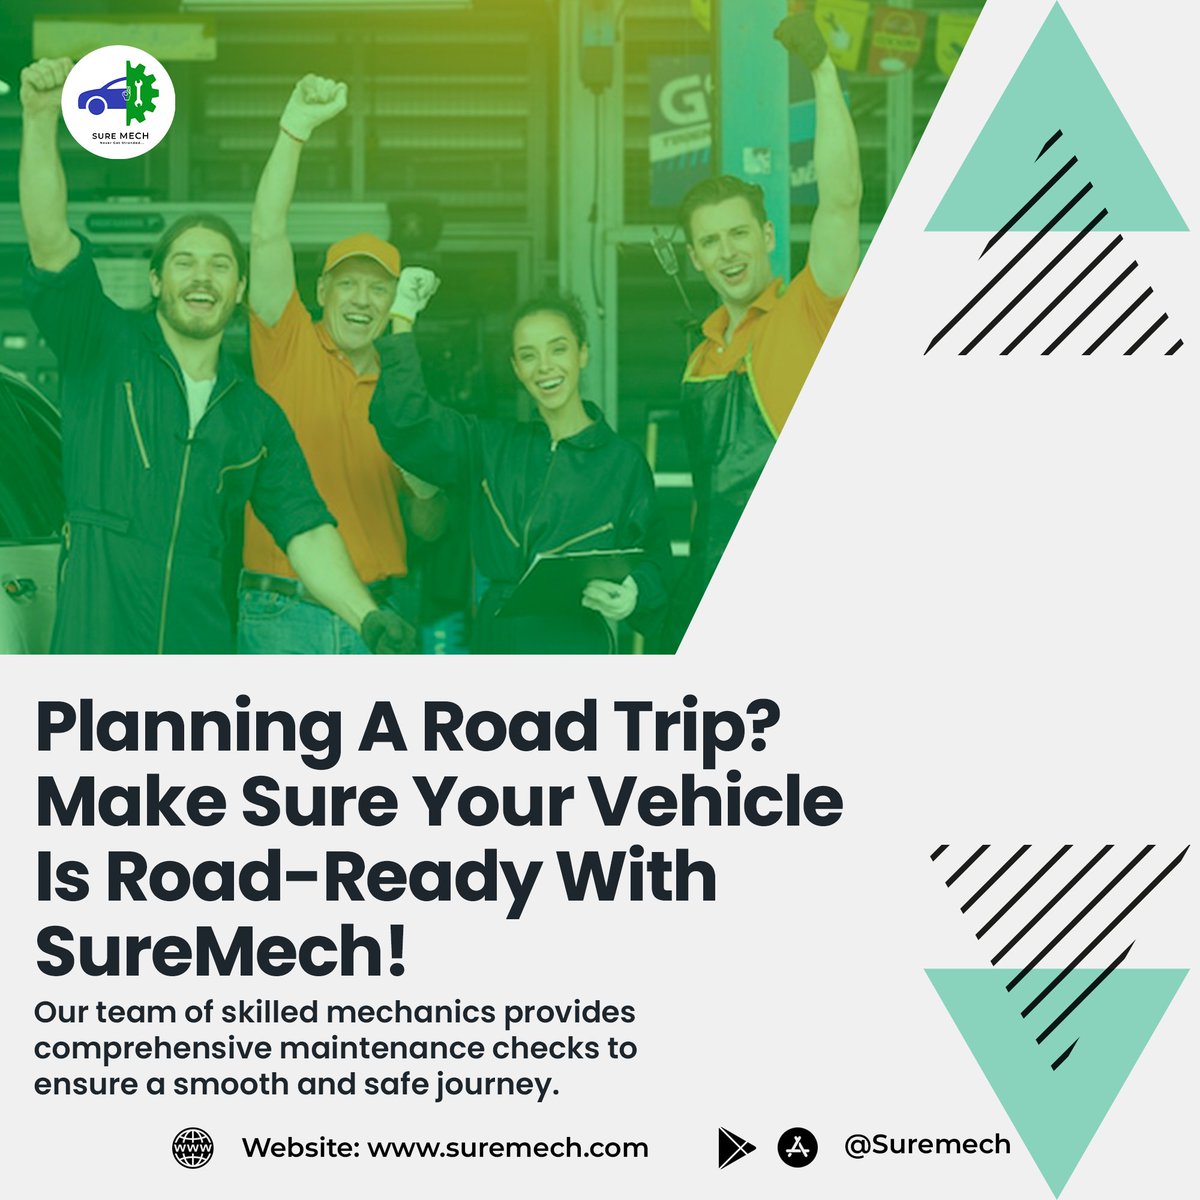 Ready for a road trip? Ensure your car's road-ready with Sure Mech! 🚗💨 Our skilled mechanics provide thorough checks for a smooth journey. Drive confidently with Sure Mech by your side. 🛠️✨ #suremech #roadTrip #carservice